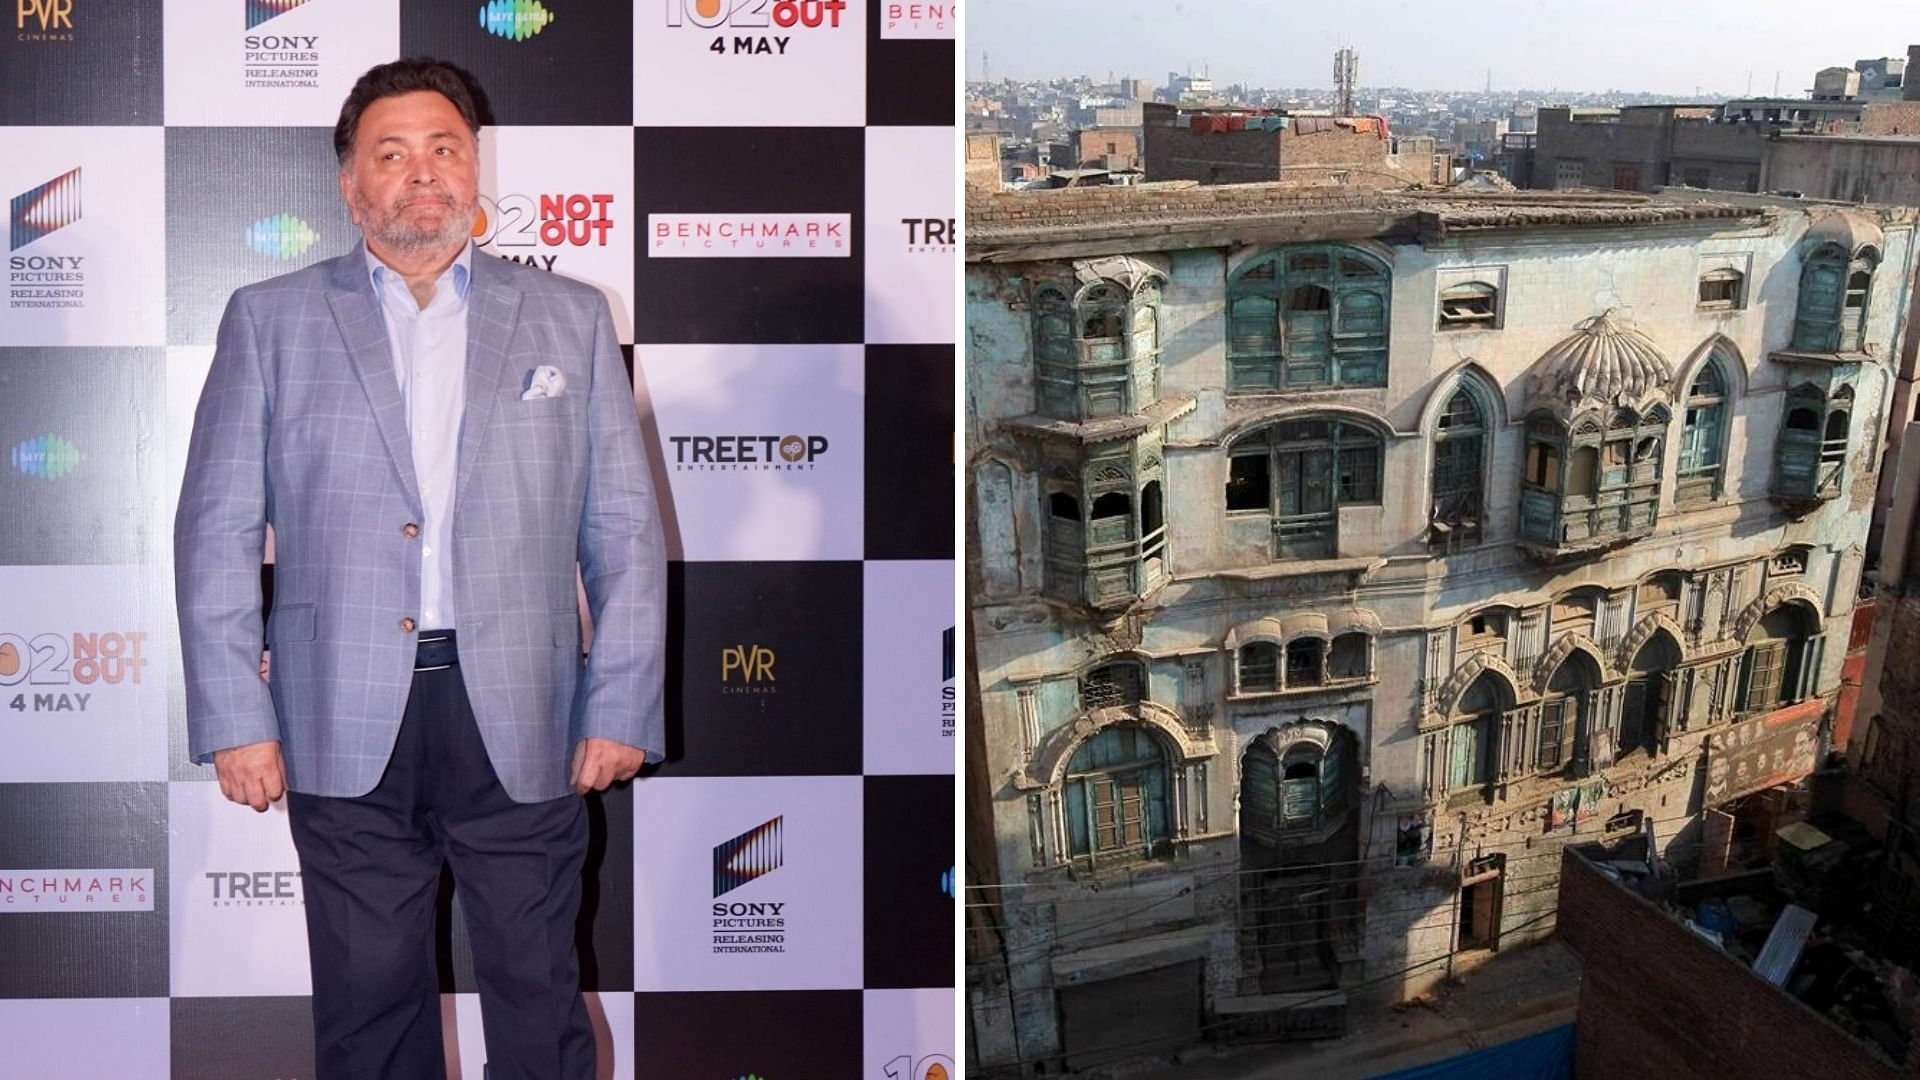 Rishi Kapoor has requested the Pakistani government to preserve his ancestral home.